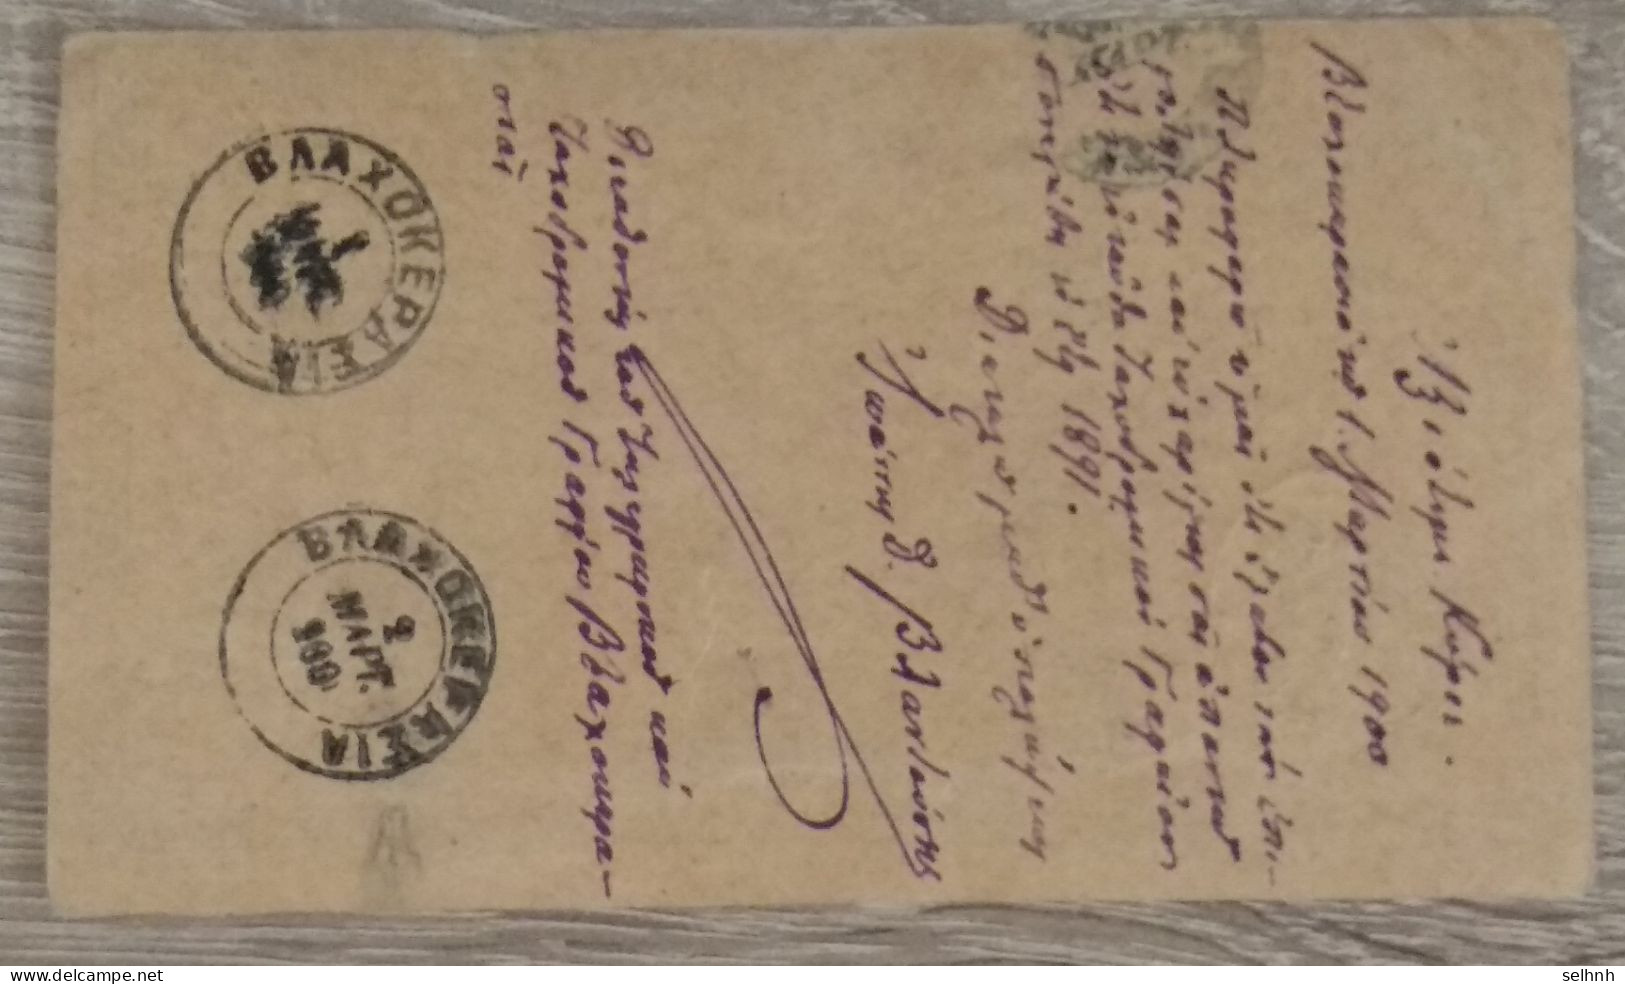 Greece PC FROM VLACHOKERASIA TO PIREAUS WITH ALL THE CANCELATIONS OF THE POST OFFICE. MAYBE UNIQUE. BEAUTIFUL. - Postal Stationery